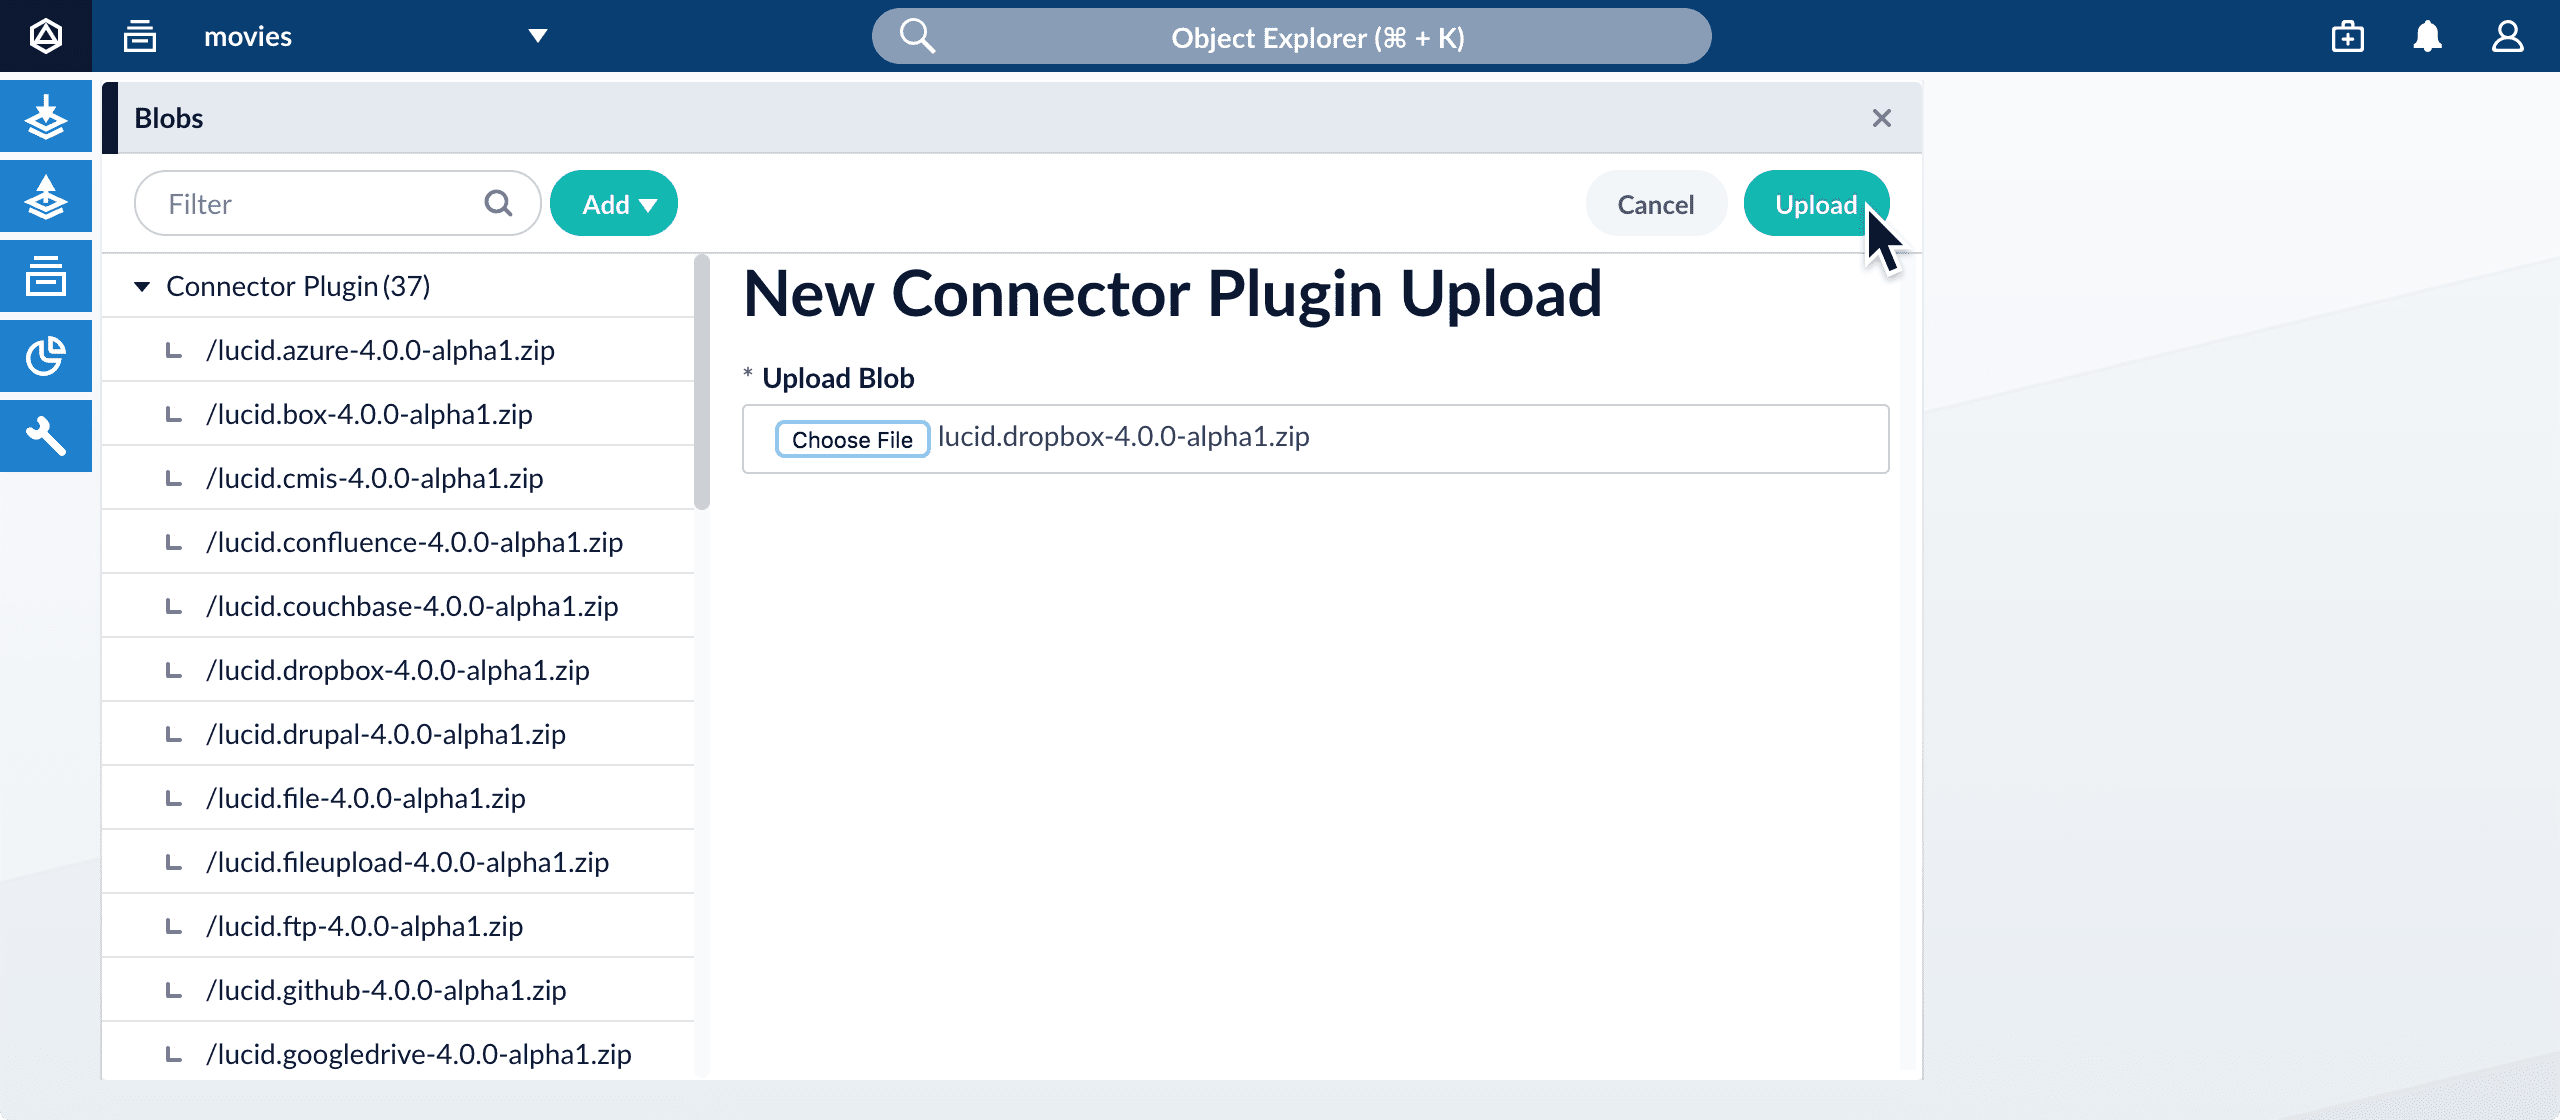 Upload a connector